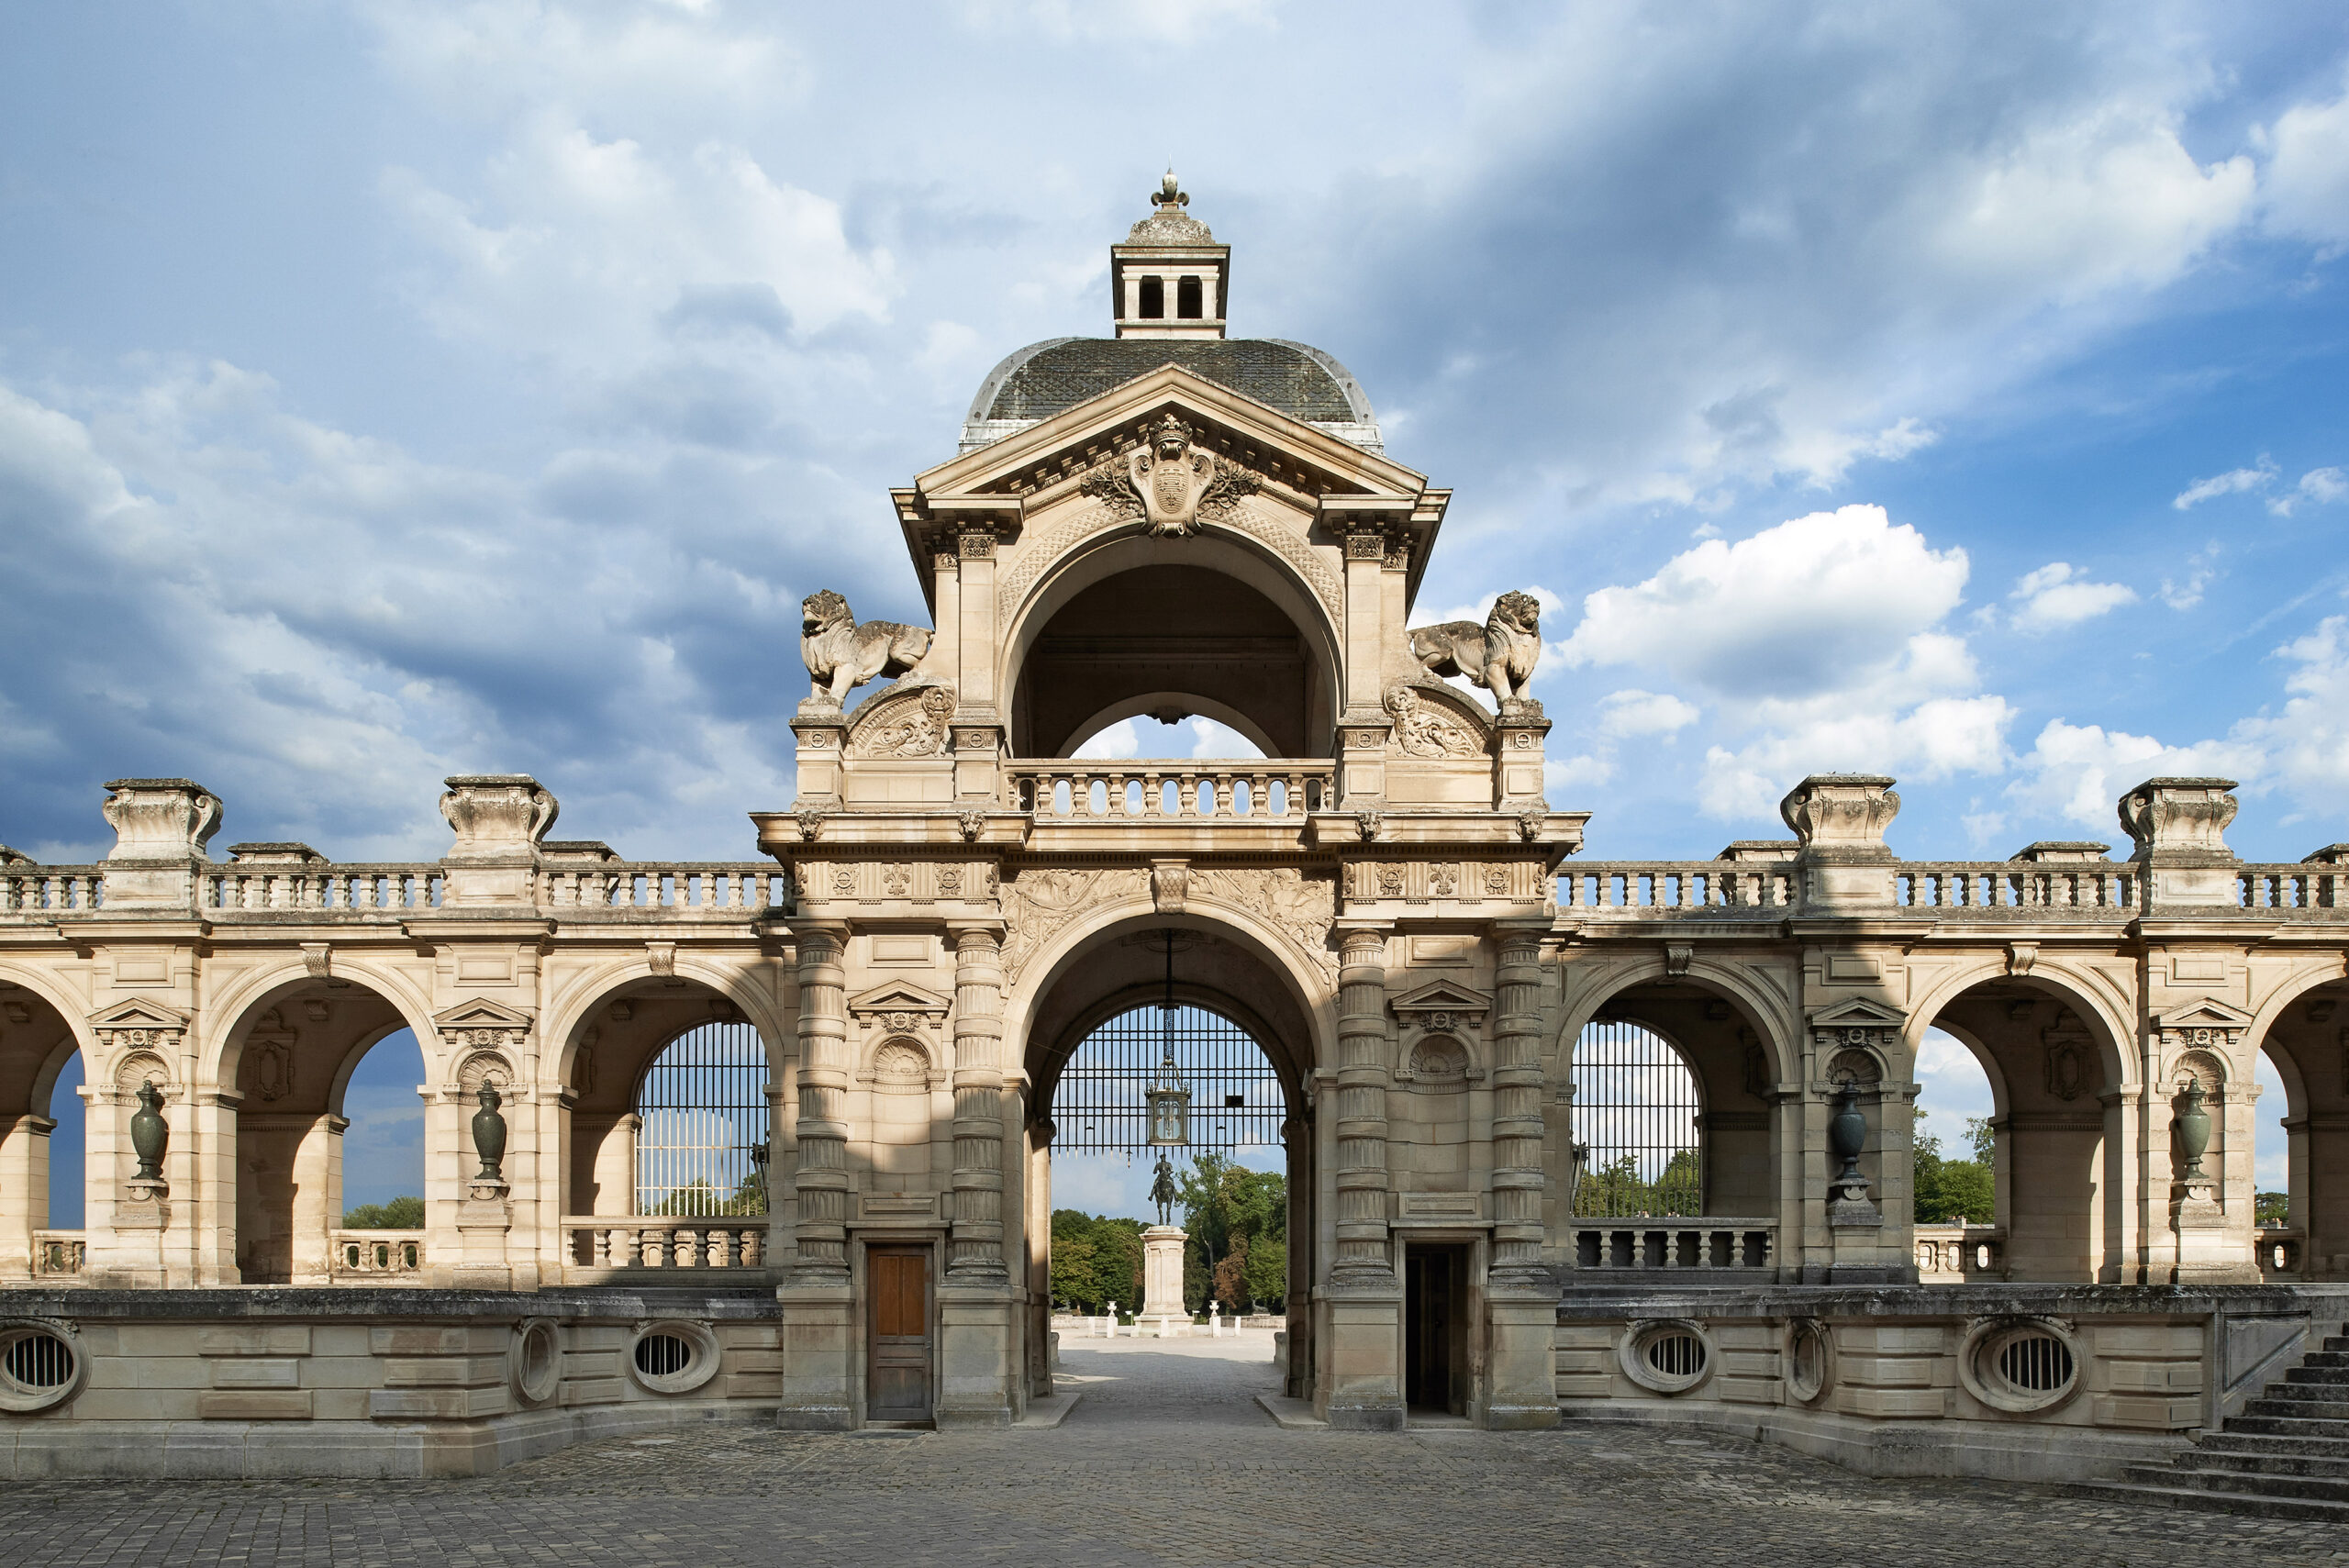 Chateau de Chantilly, France: visitor guide and tourist information